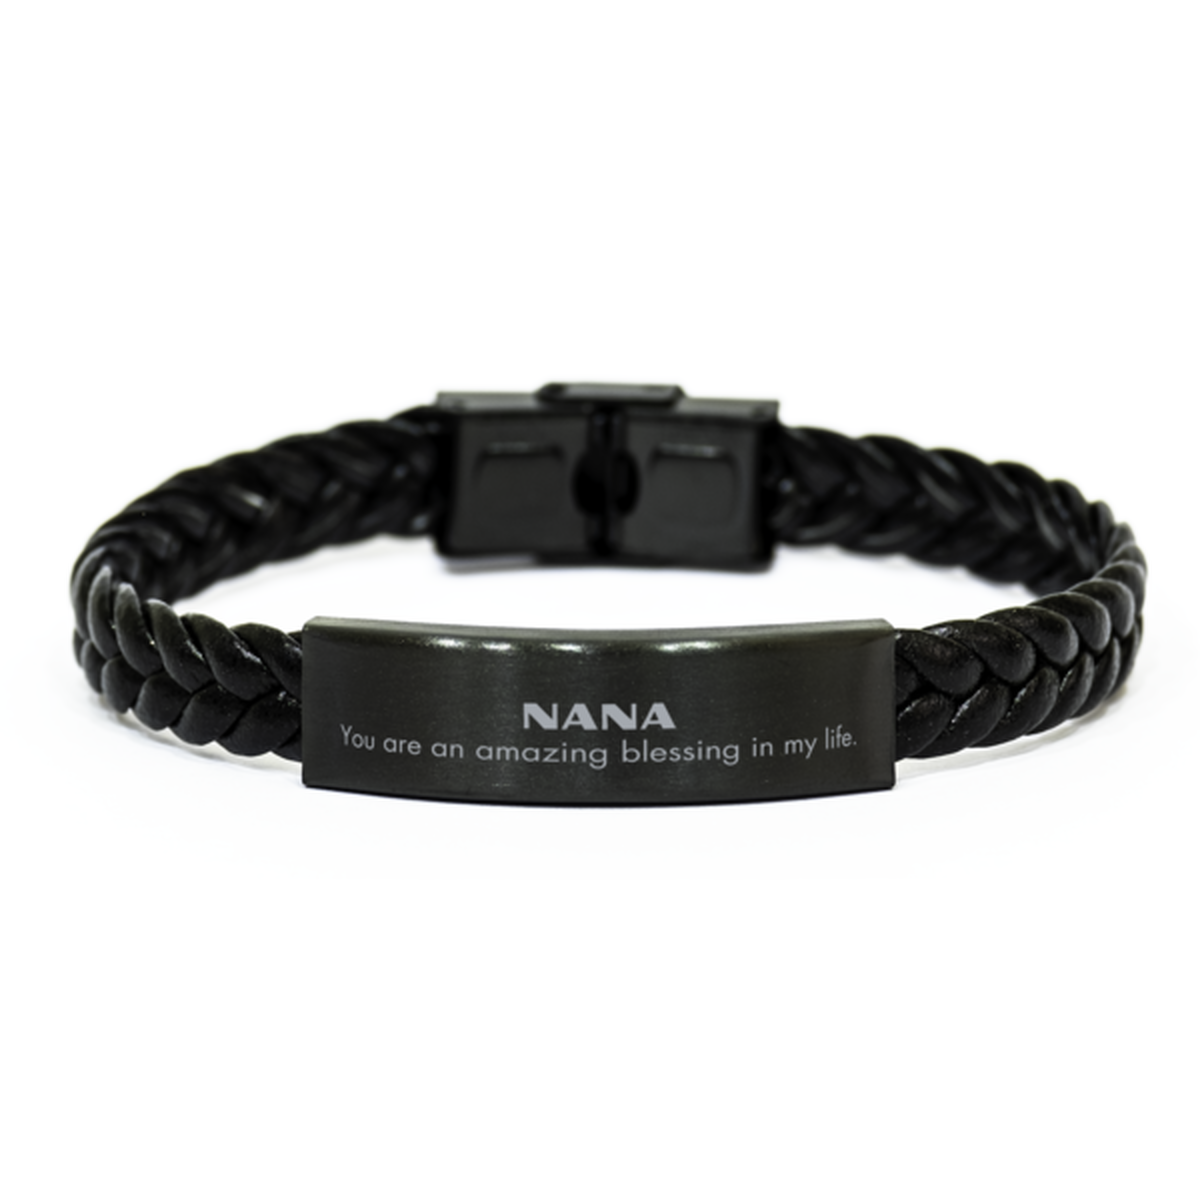 Nana Braided Leather Bracelet, You are an amazing blessing in my life, Thank You Gifts For Nana, Inspirational Birthday Christmas Unique Gifts For Nana